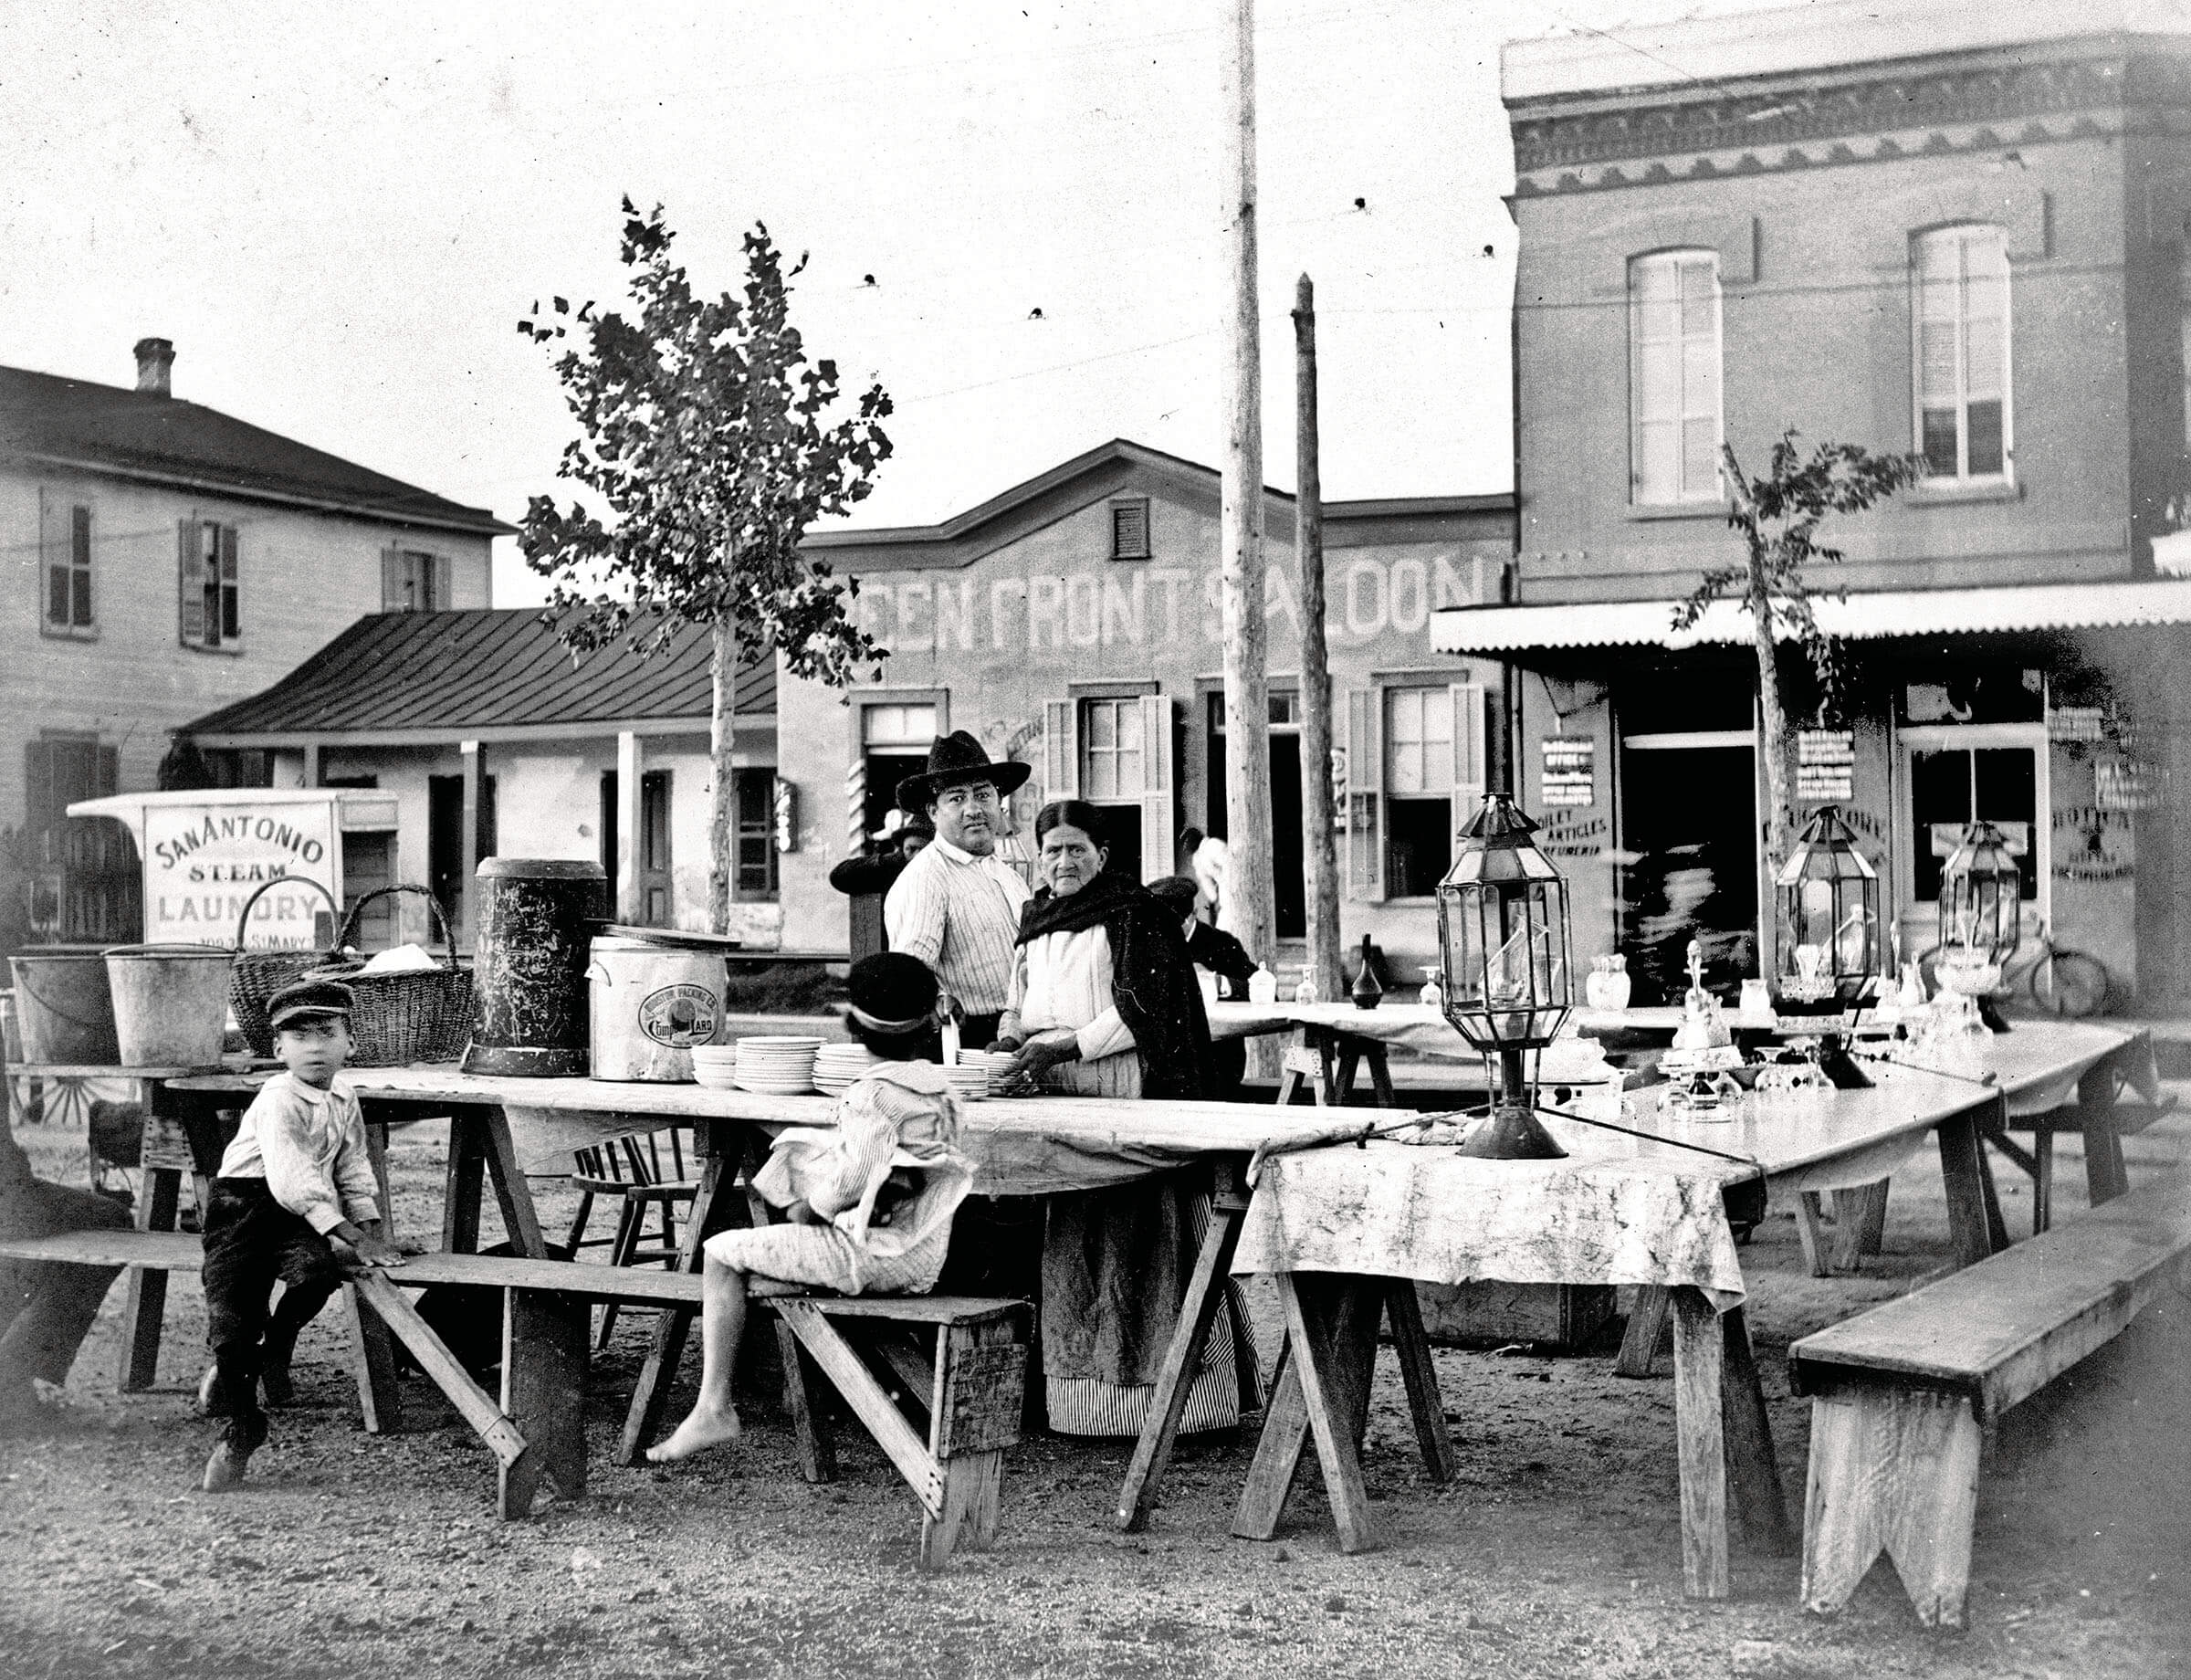 A black-and-white photo of people seated at picnic tables outside